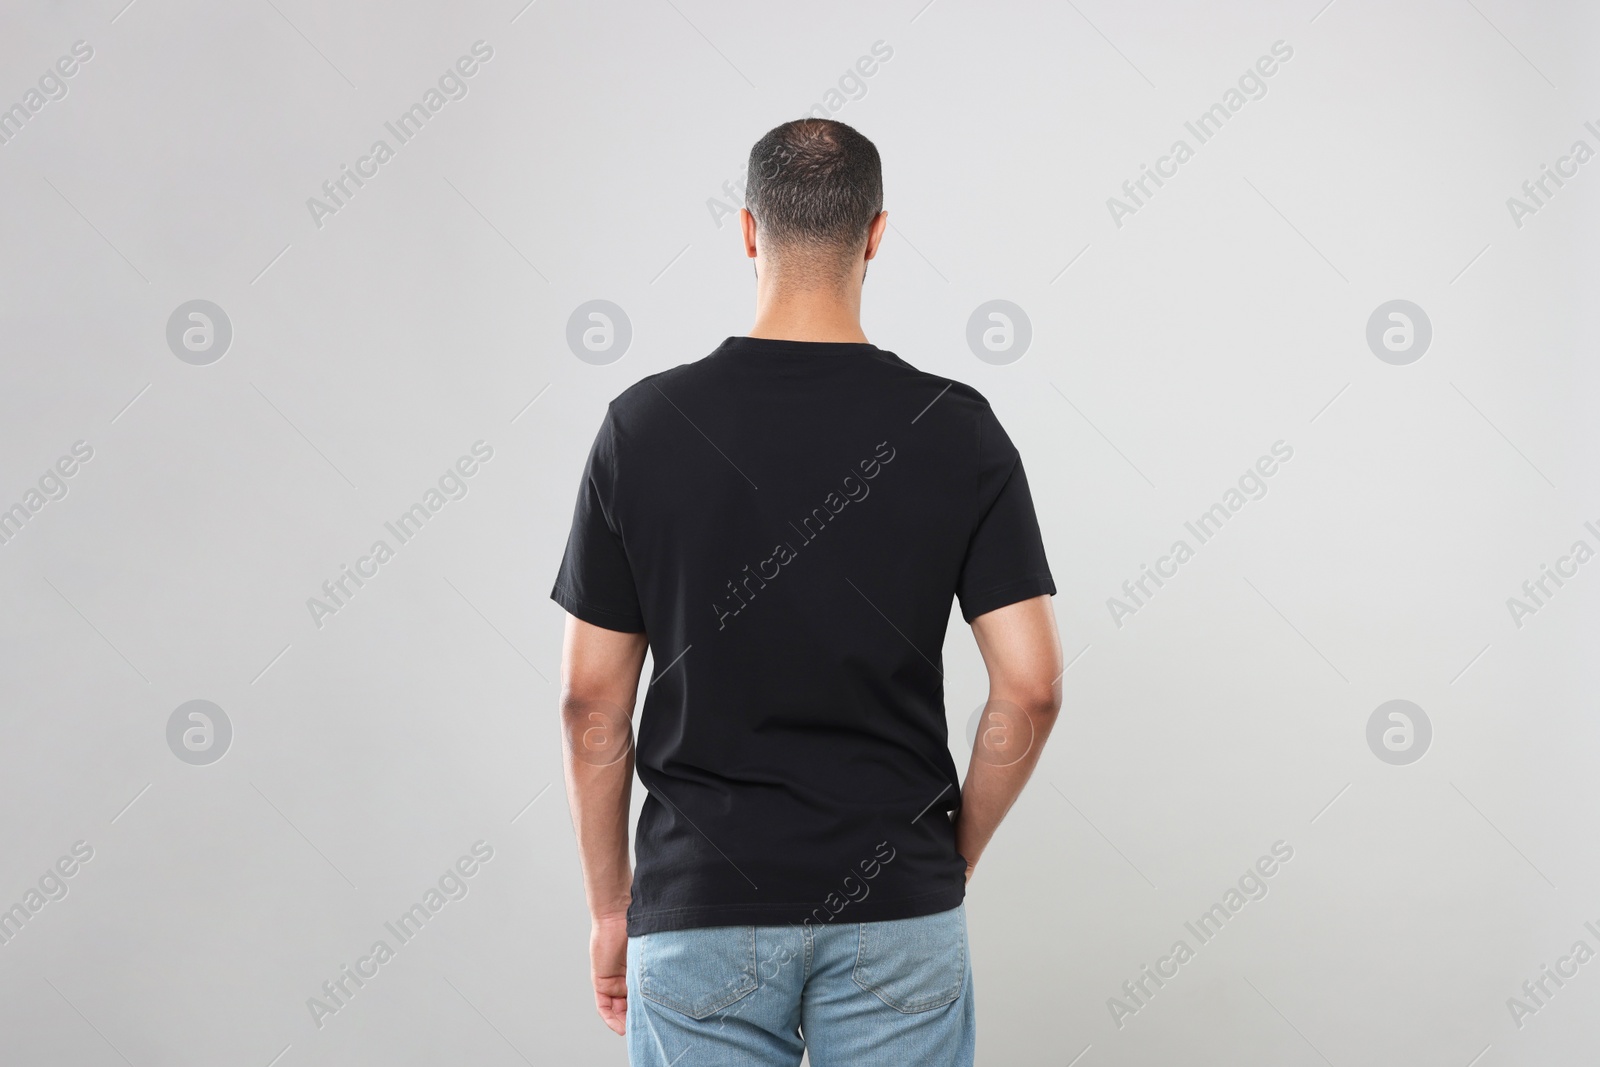 Photo of Man wearing black t-shirt on gray background, back view